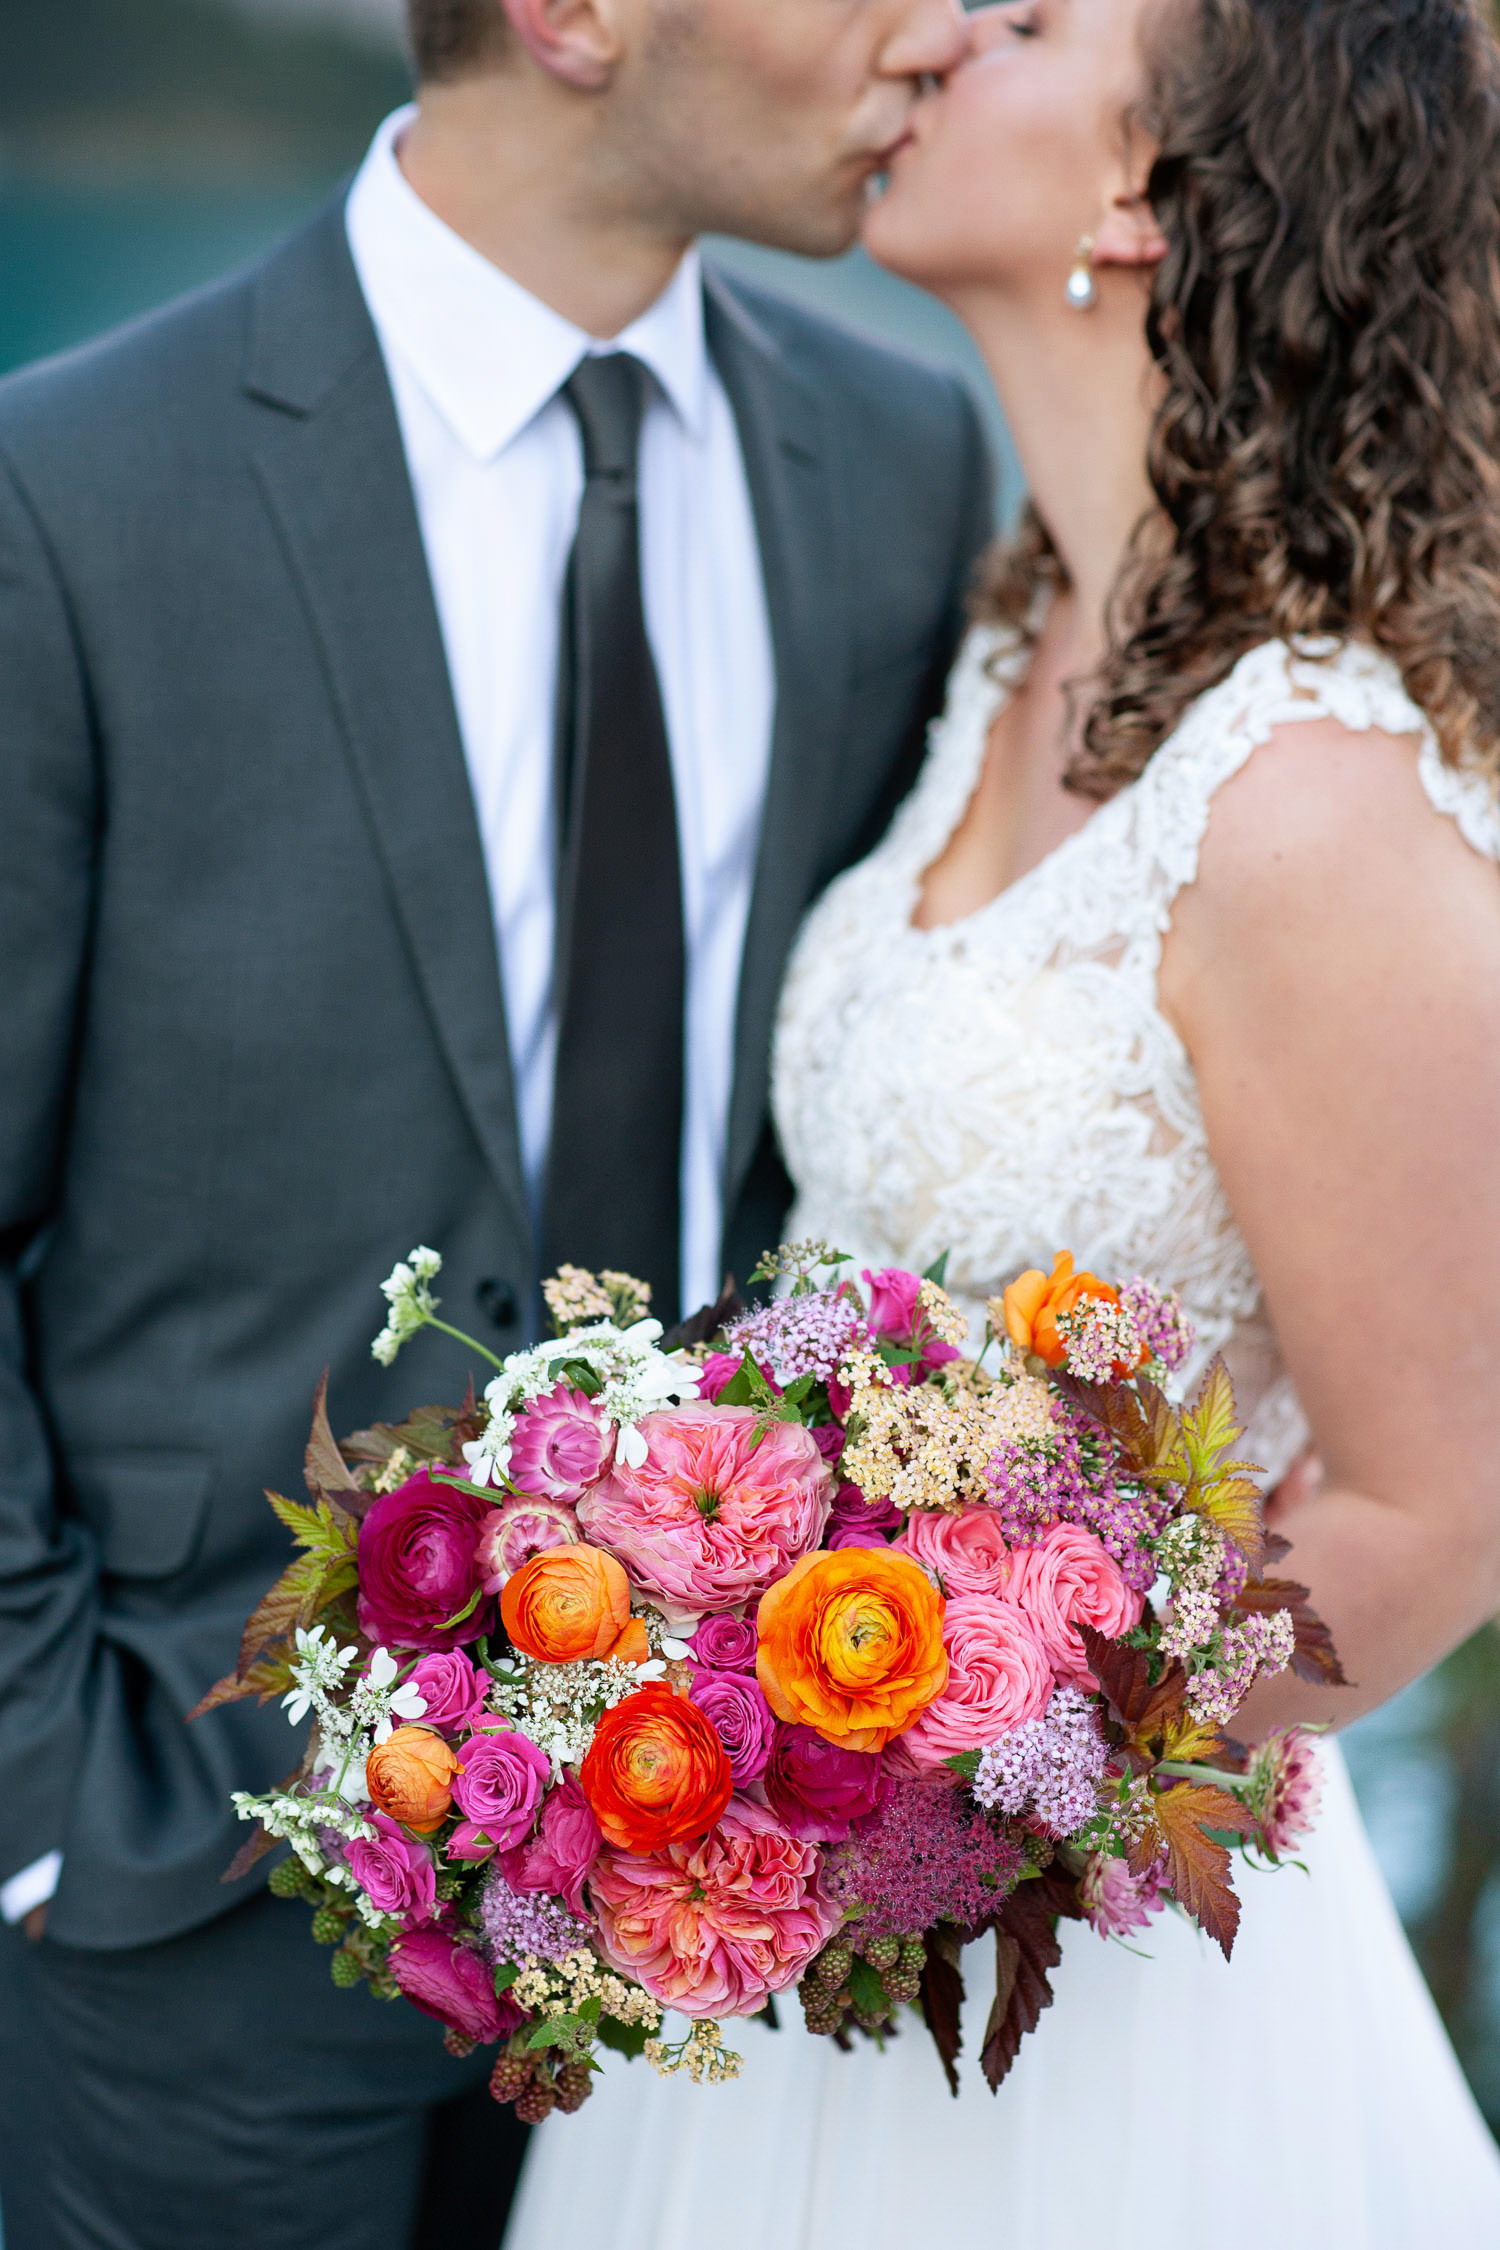 Moraine Lake bride carries a pink bouquet captured by Tara Whittaker Photography